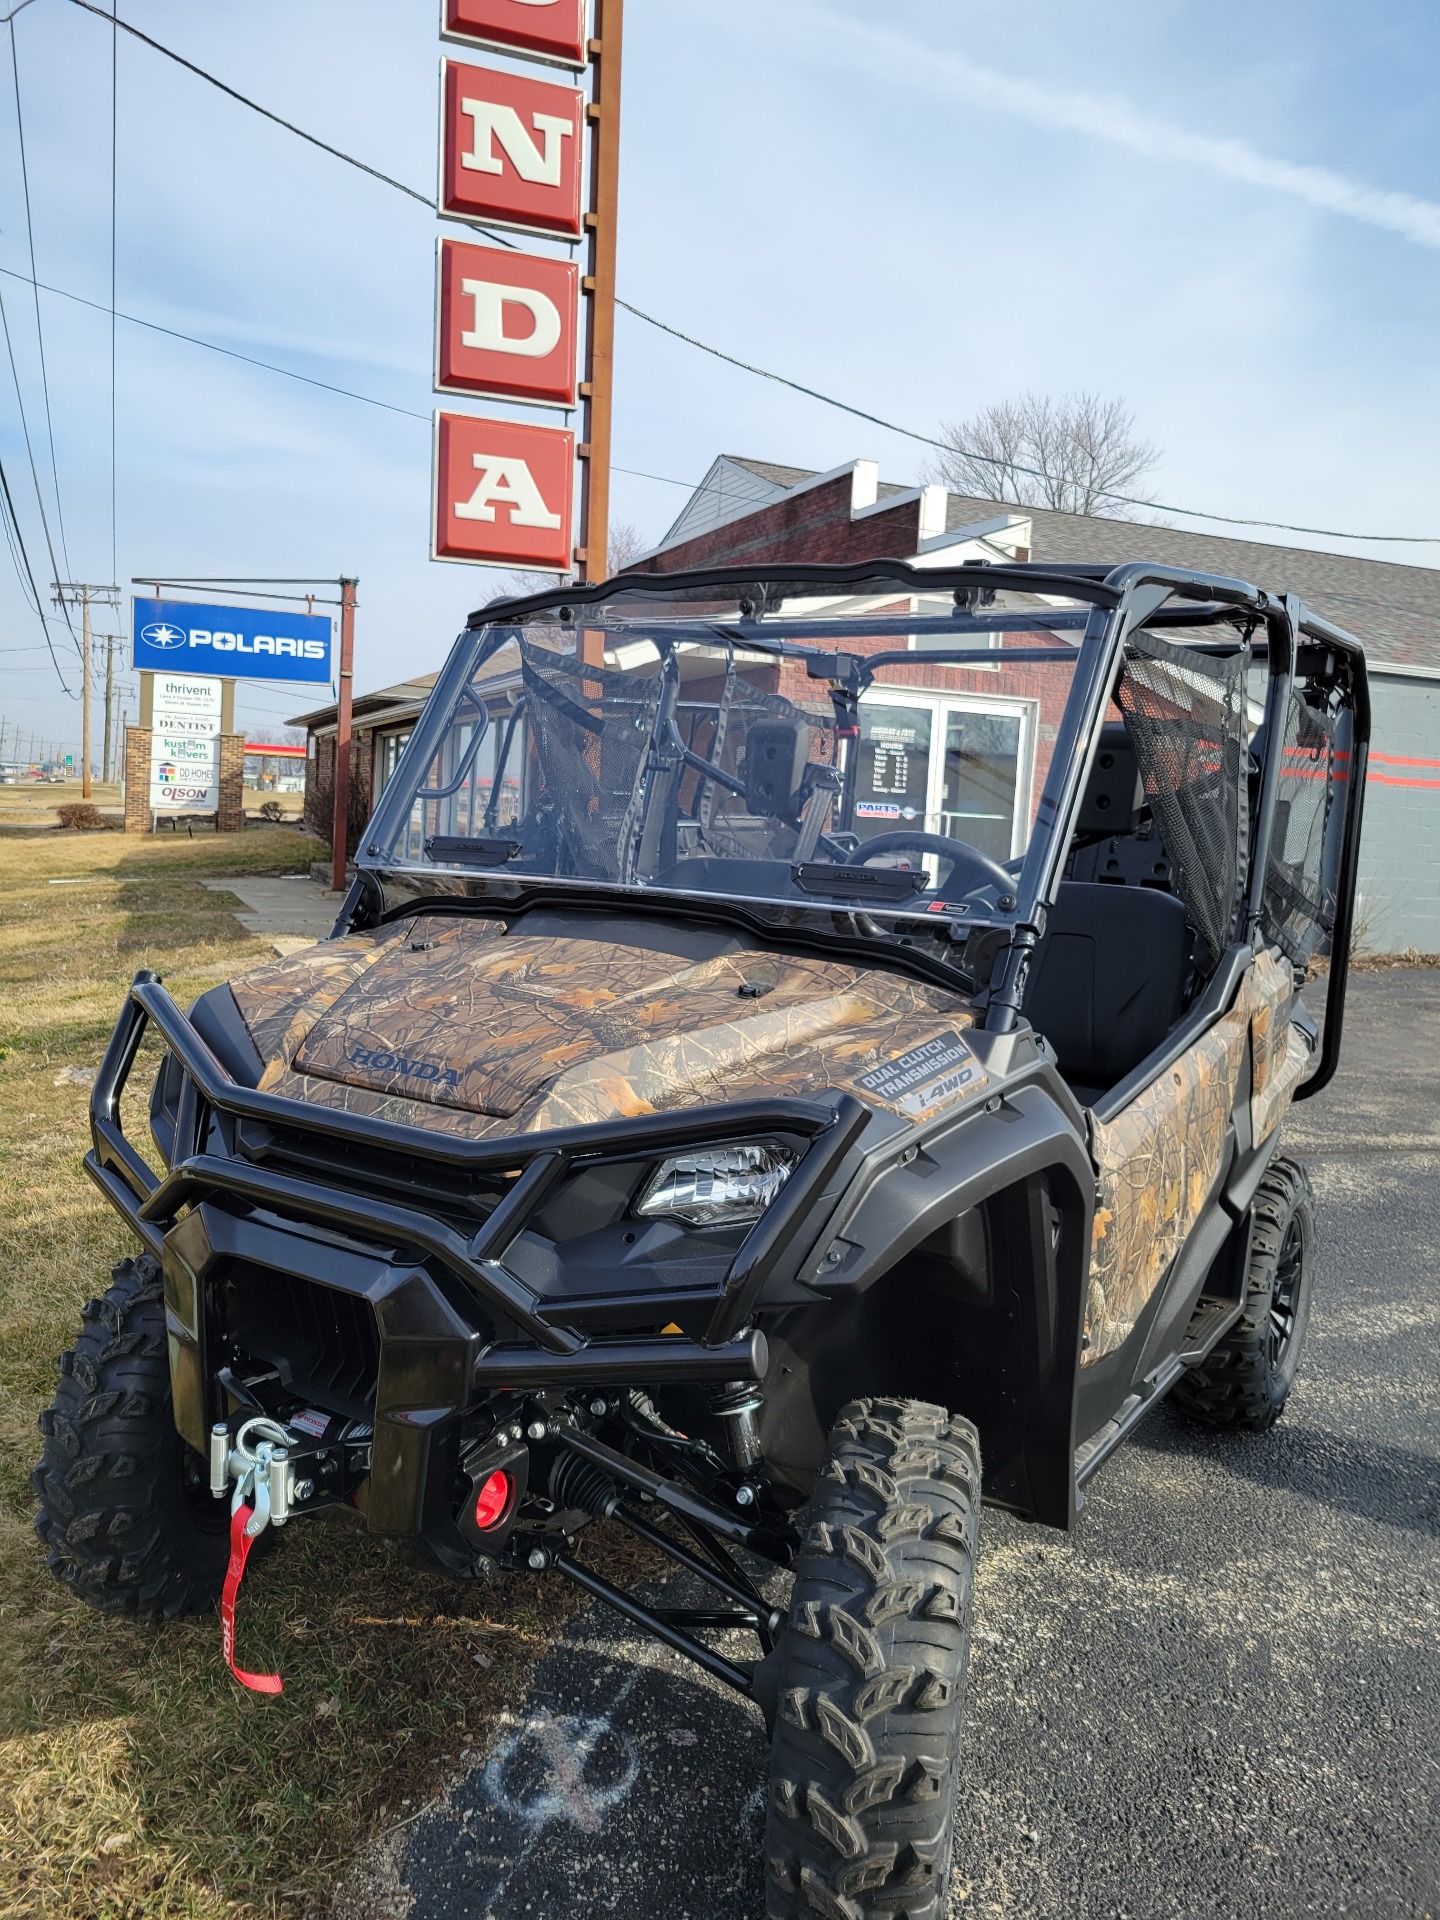 2022 Honda Pioneer 1000-5 Forest in Sterling, Illinois - Photo 2